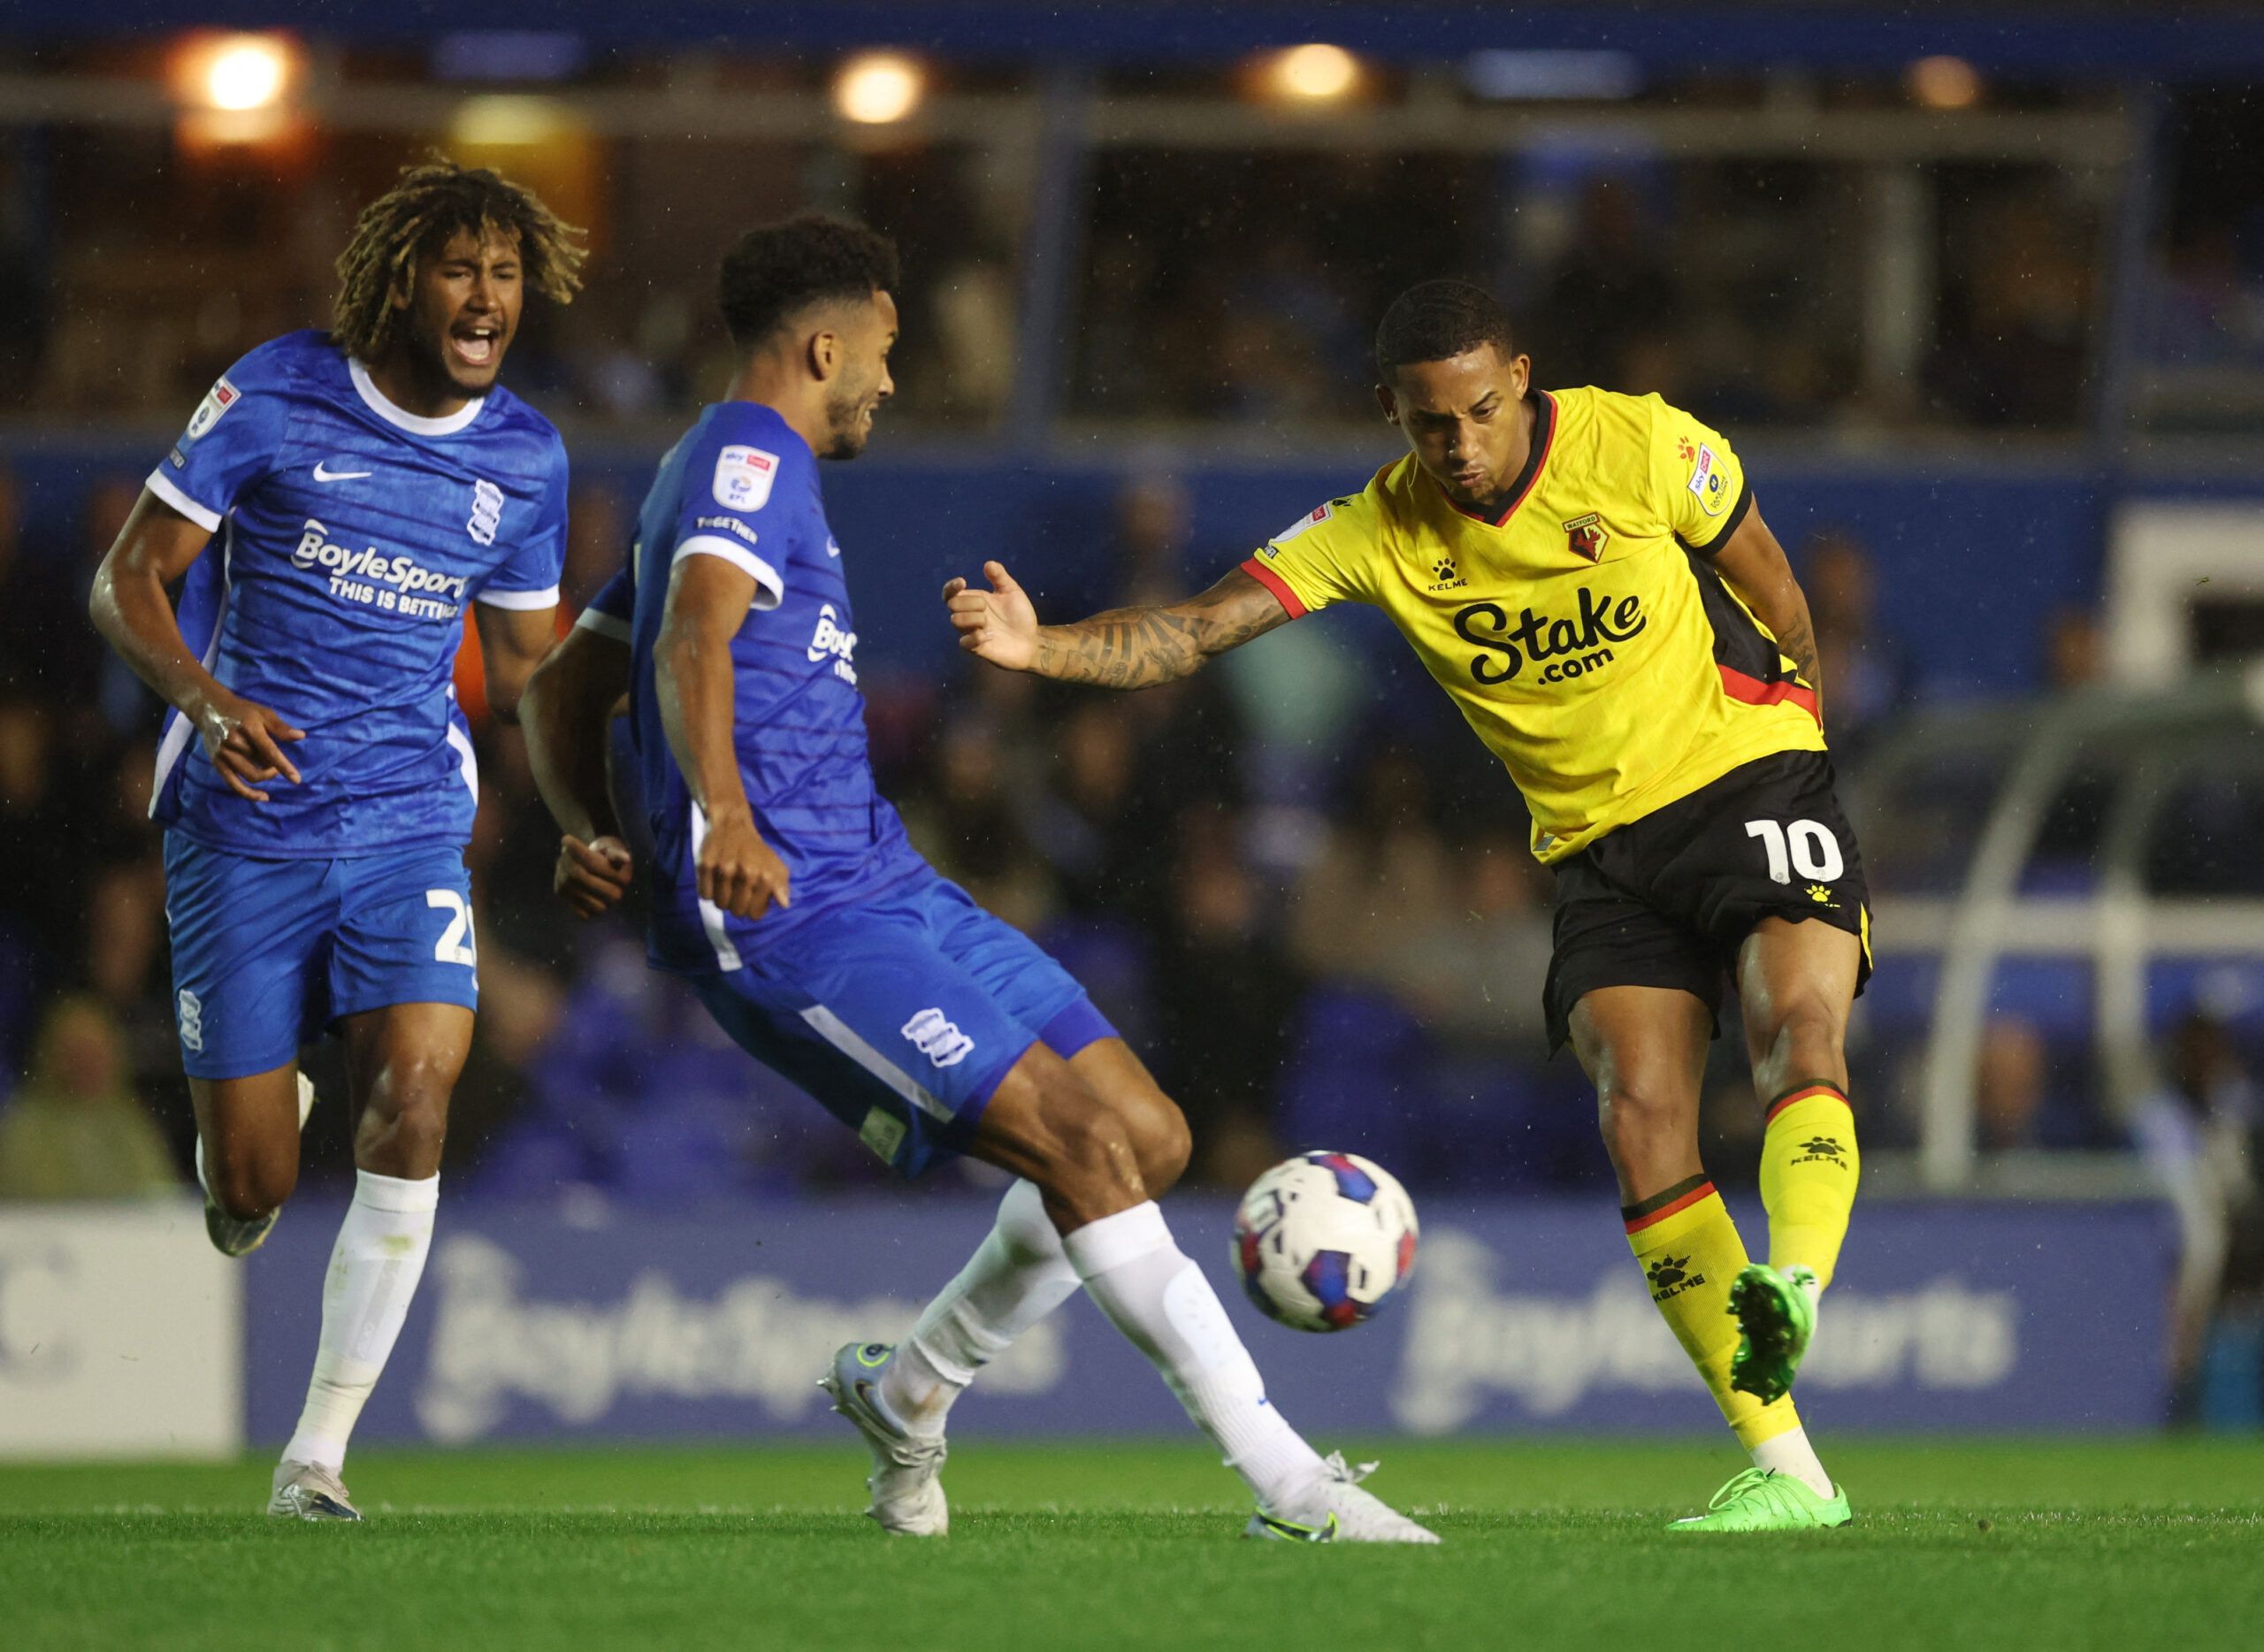 Soccer Football - Birmingham City v Watford - St Andrew's, Birmingham, Britain - August 16, 2022 Watford's Joao Pedro shoots at goal Action Images/Carl Recine EDITORIAL USE ONLY. No use with unauthorized audio, video, data, fixture lists, club/league logos or 'live' services. Online in-match use limited to 75 images, no video emulation. No use in betting, games or single club /league/player publications.  Please contact your account representative for further details.